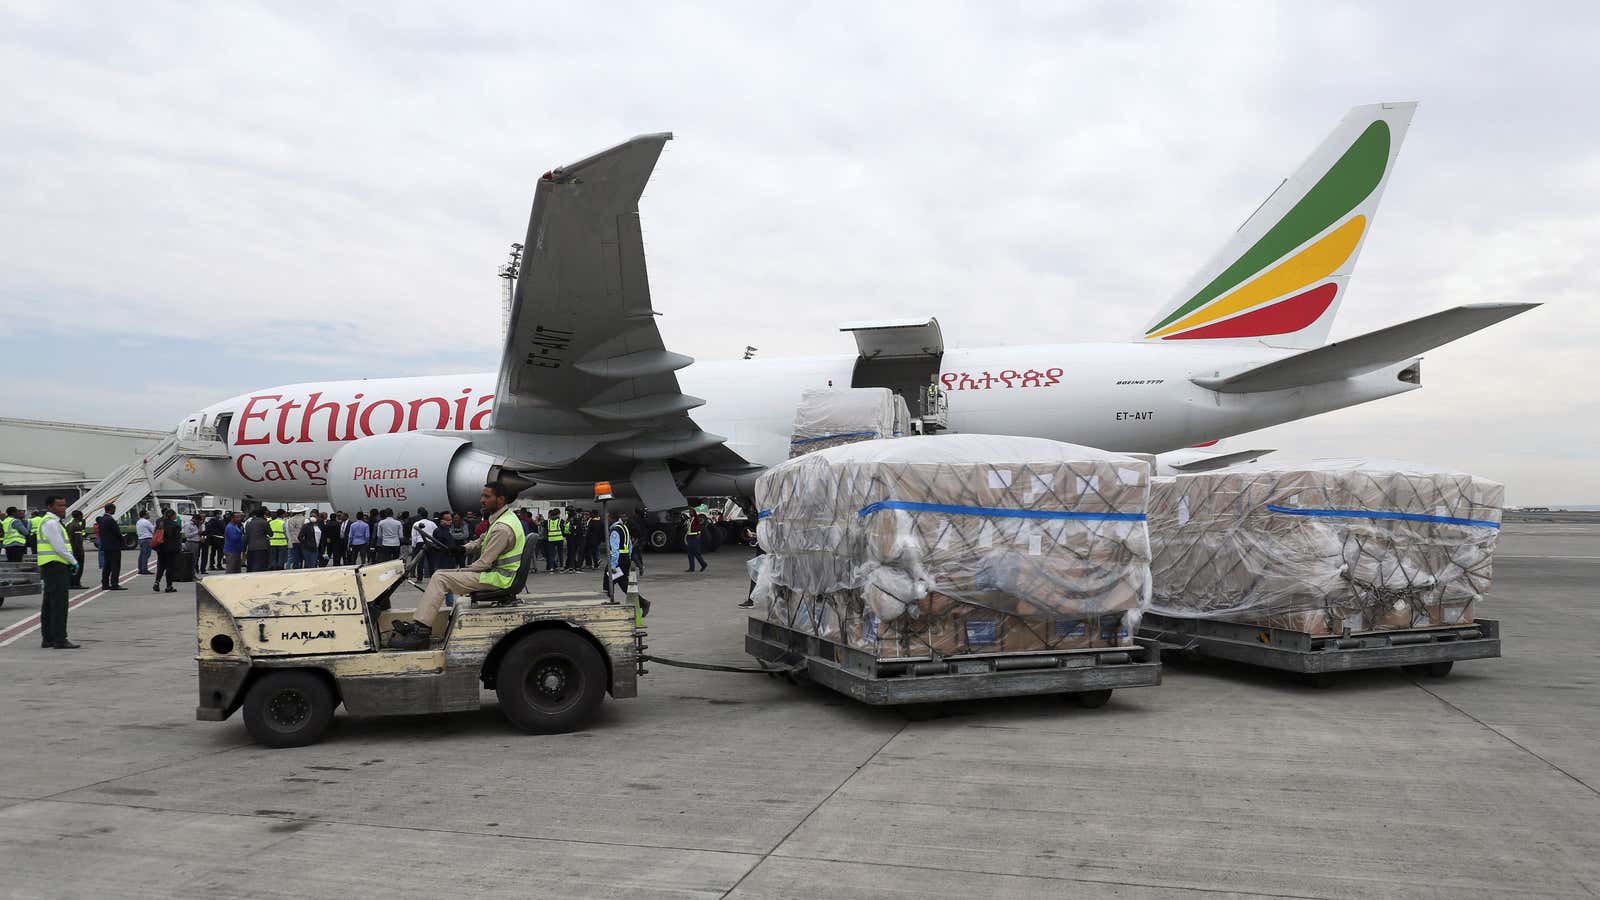 A medical donation from Chinese billionaire Jack Ma and Alibaba Foundation to Africa for coronavirus testing arrives at Addis Ababa, Ethiopia Mar. 22.